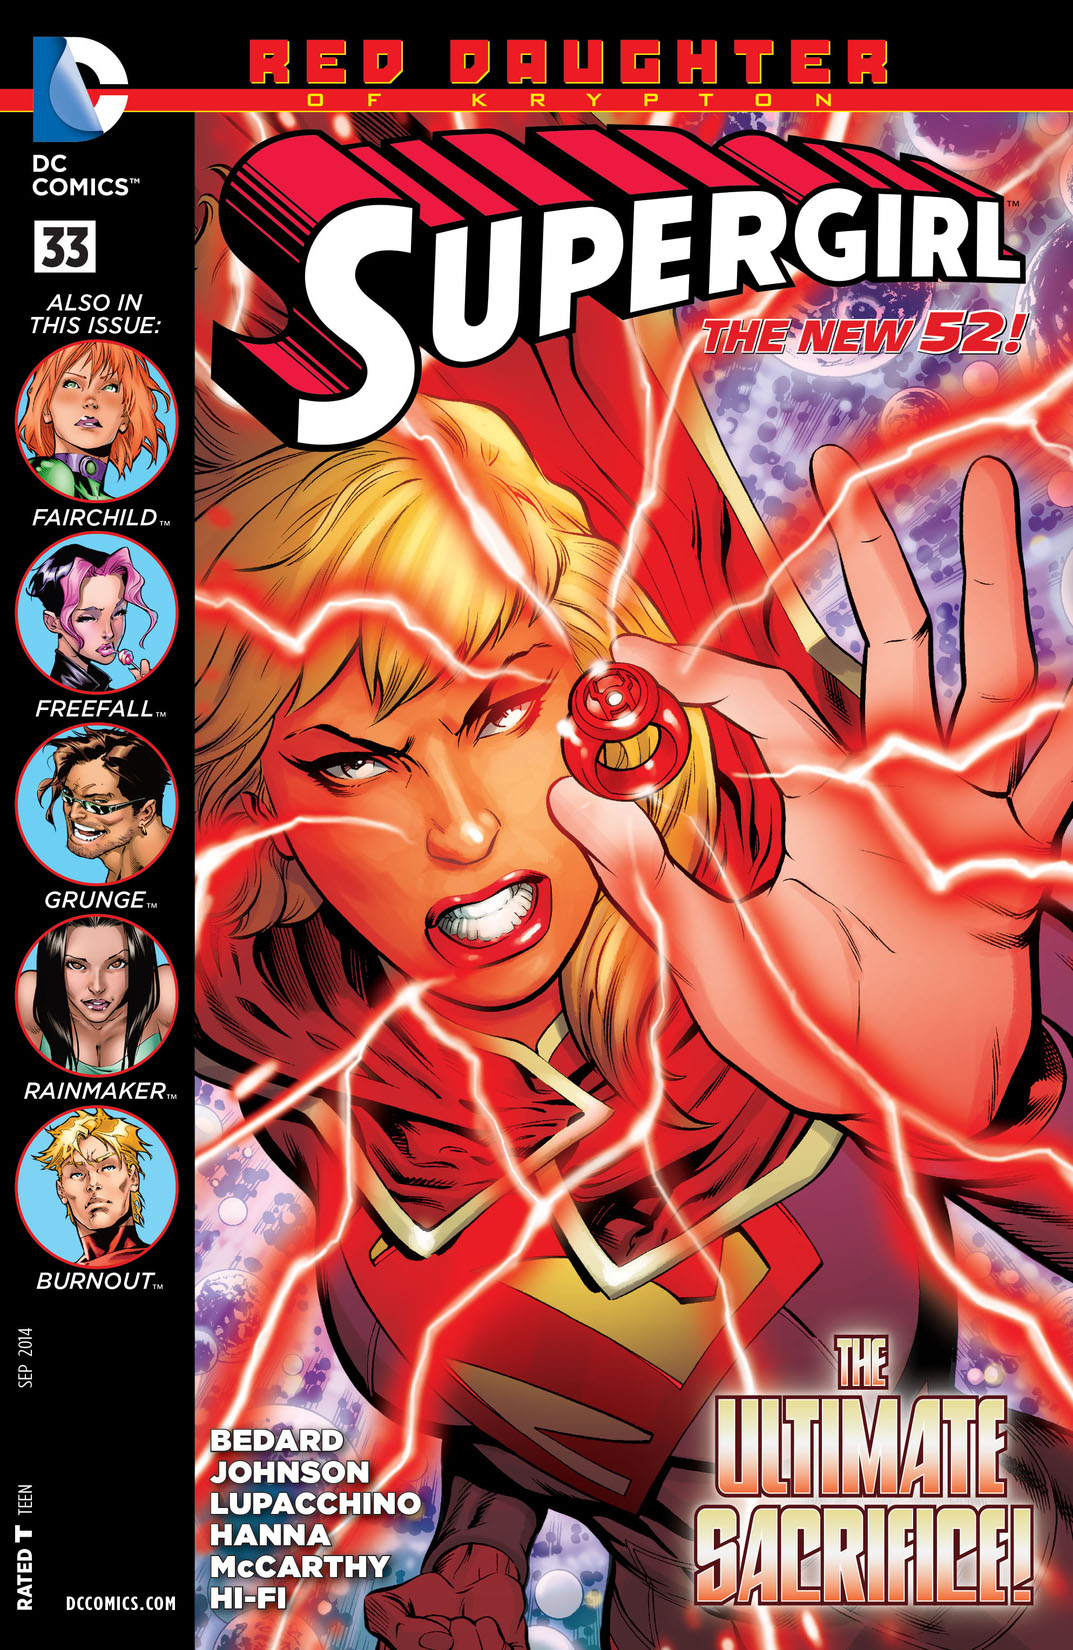 Supergirl (2011-) #33 preview images